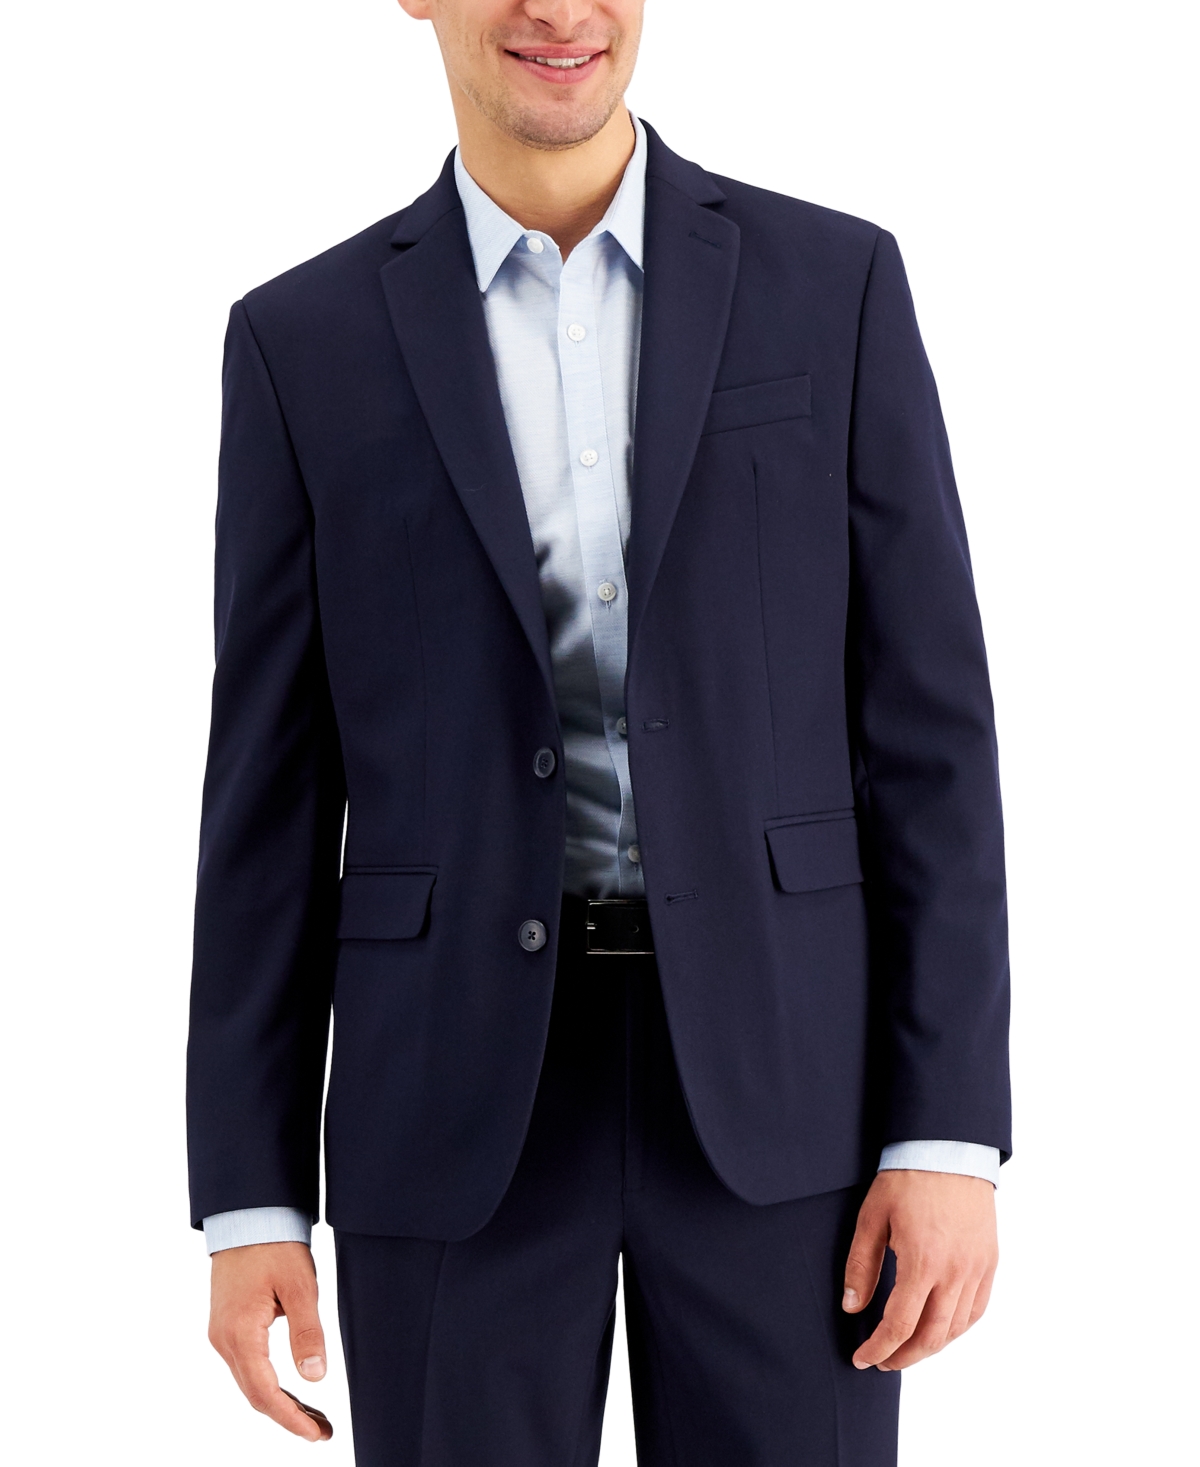 Men's Slim-Fit Navy Solid Suit Jacket, Created for Macy's - Timeless Navy Combo